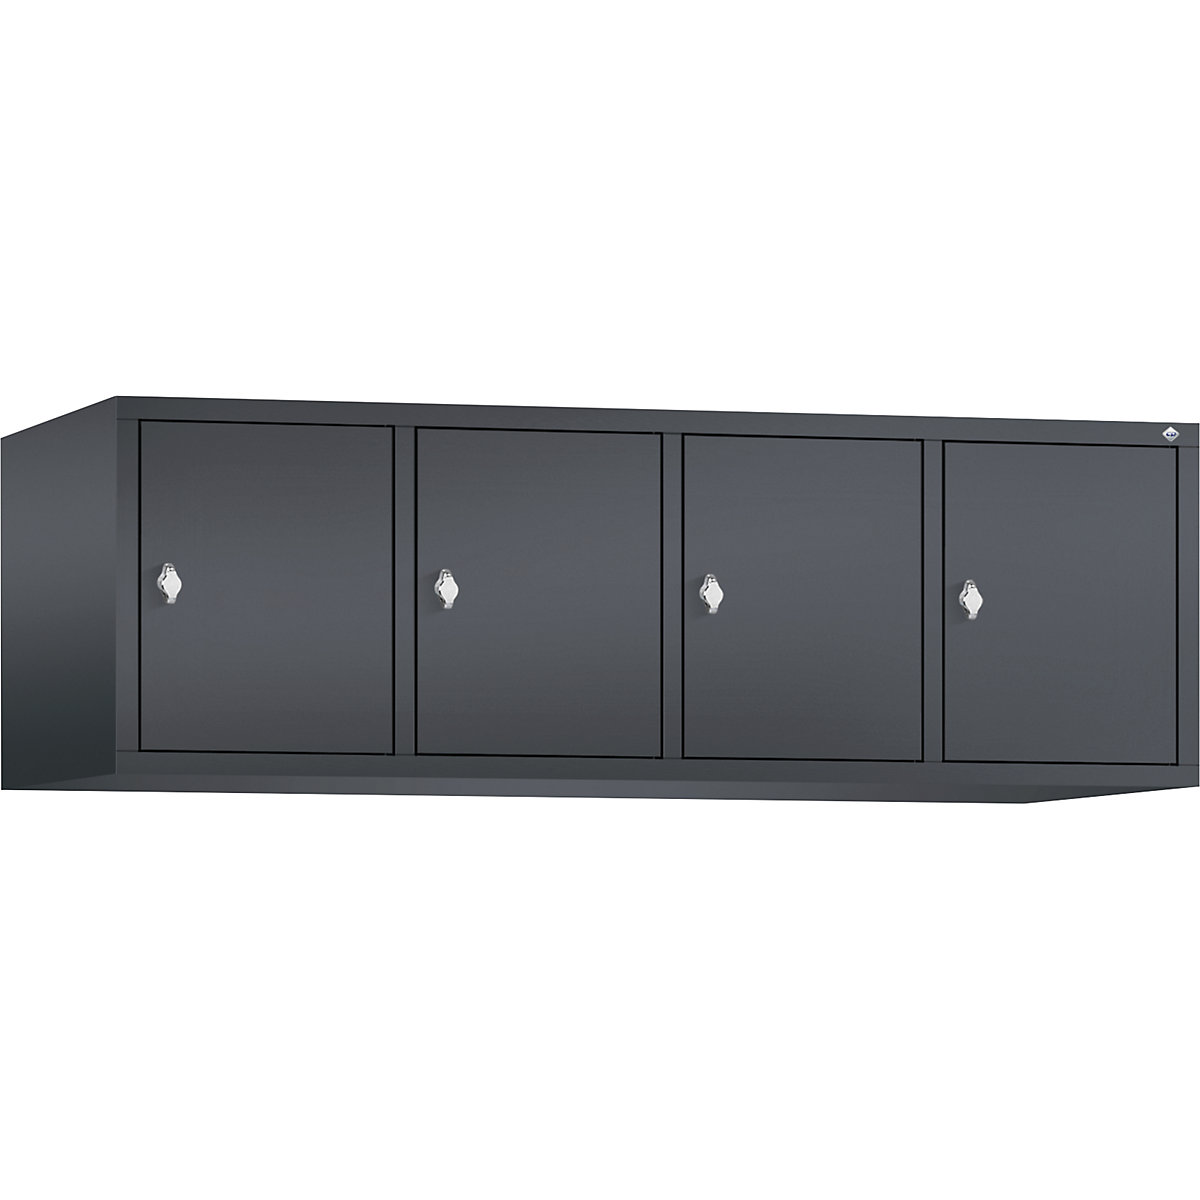 CLASSIC add-on cupboard – C+P, 4 compartments, compartment width 400 mm, black grey-14